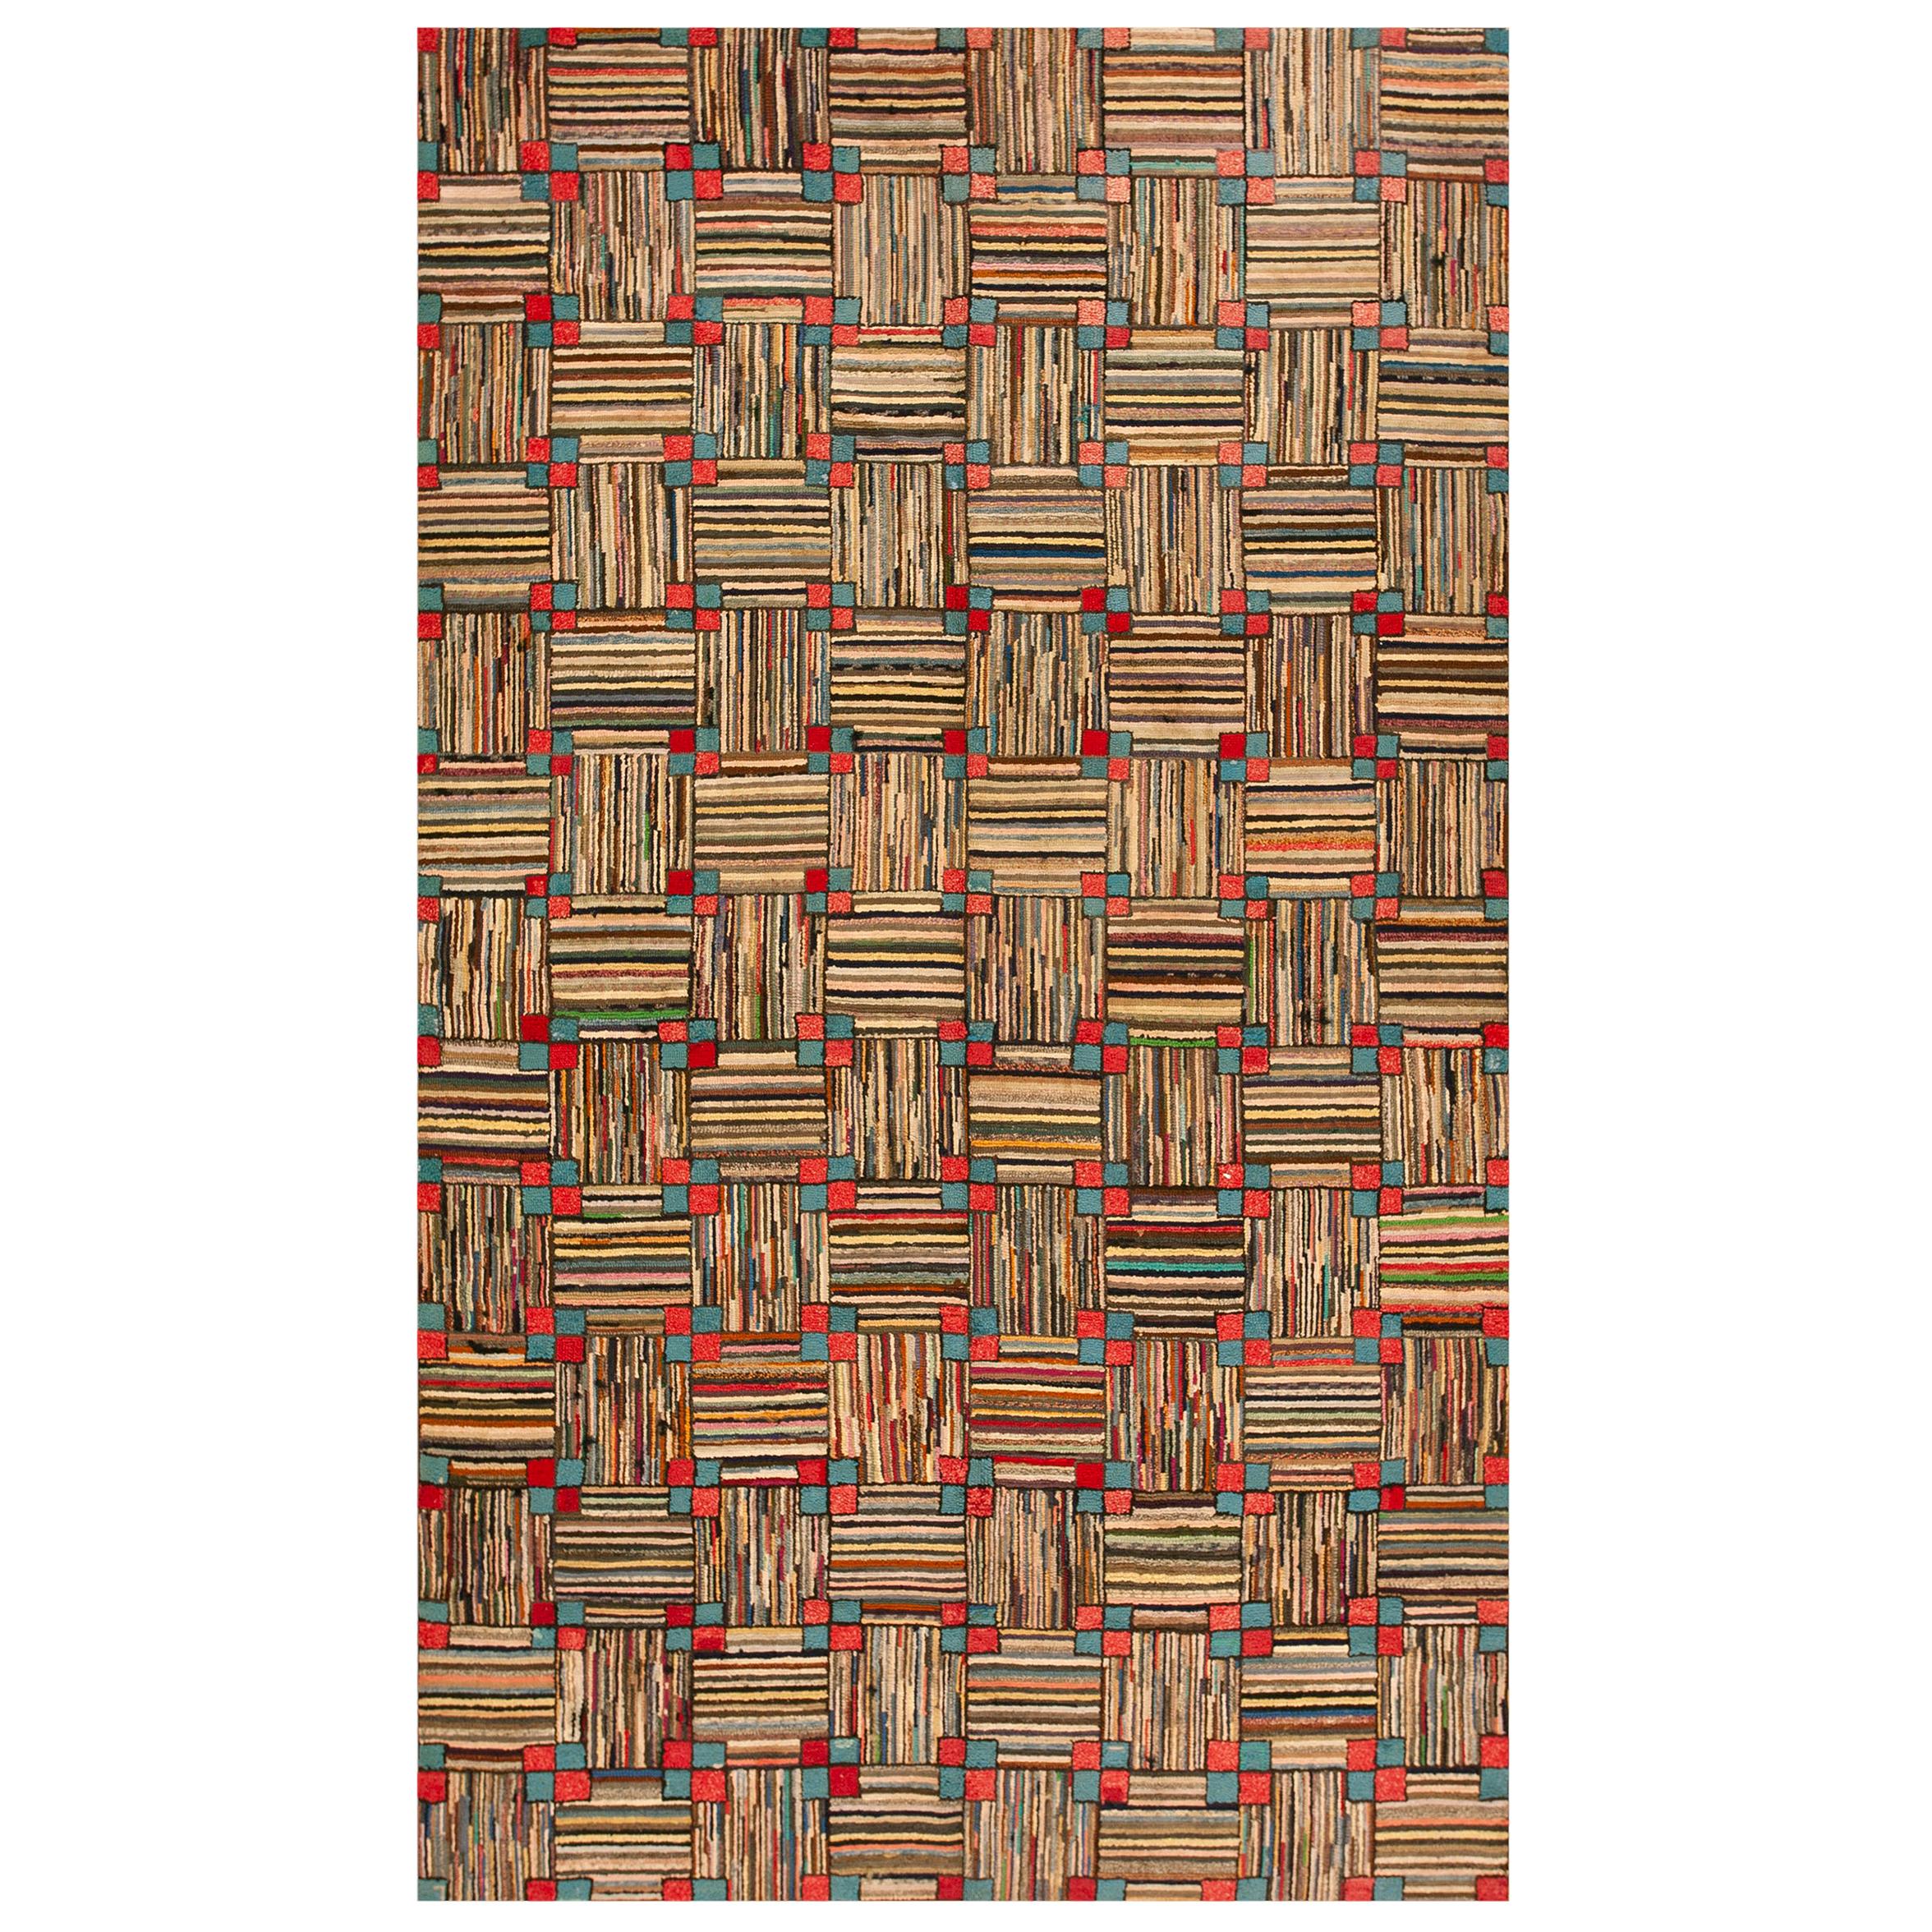 Early 20th Century American Hooked Rug ( 5'10" x 9'8" - 178 x 295 )